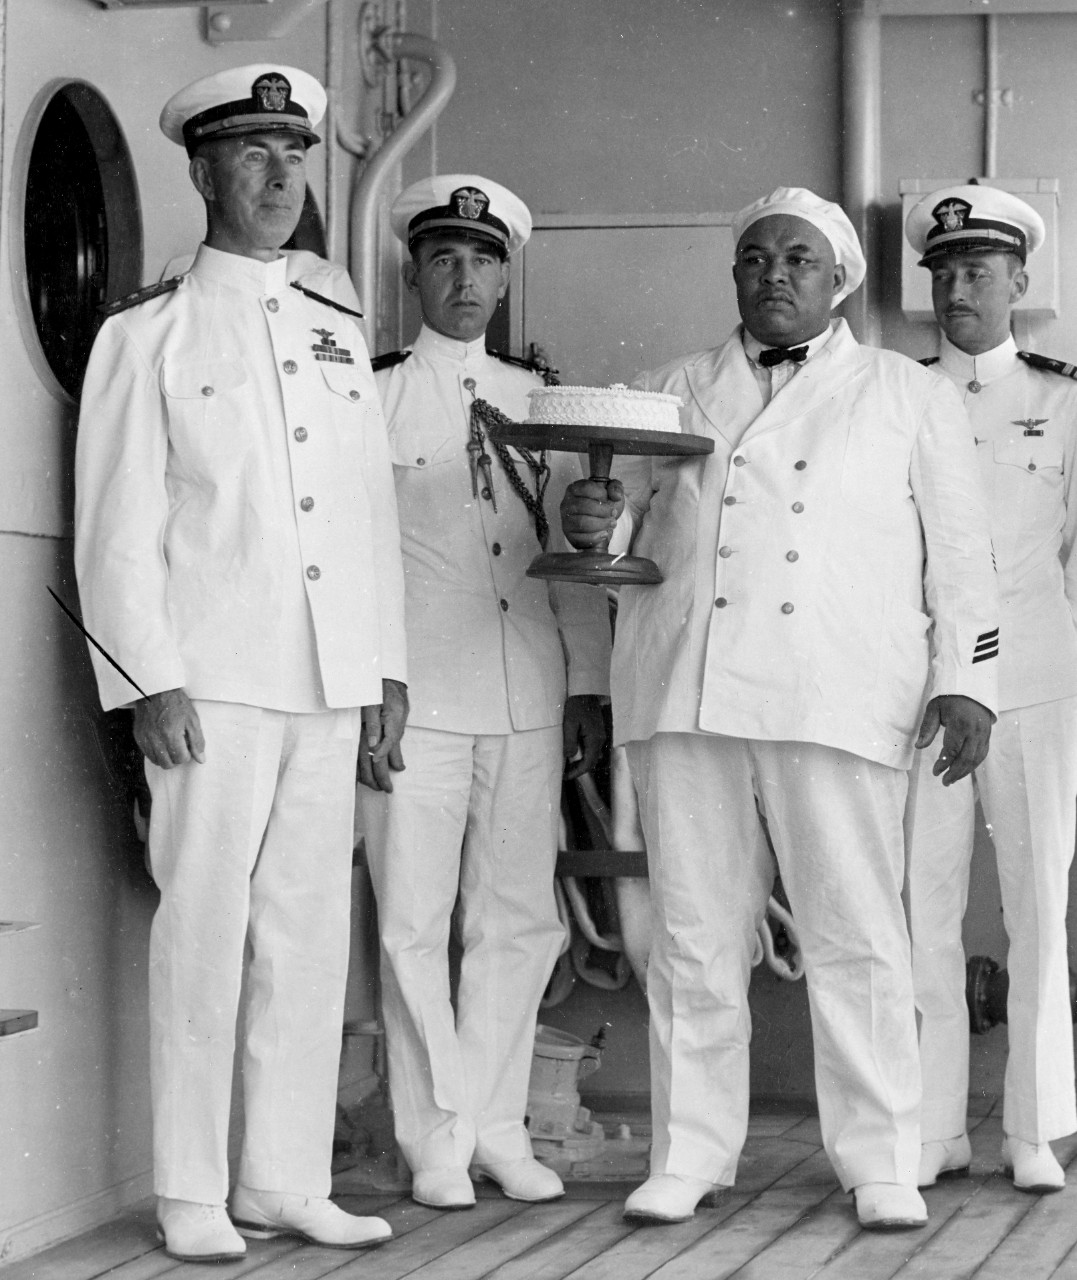 Rear Adm. Halligan and Lt. Ward receive cake, 18 May 1934. (U.S. Navy Photograph 80-G-462748, National Archives and Records Administration, Still Pictures Division, College Park, Md.)